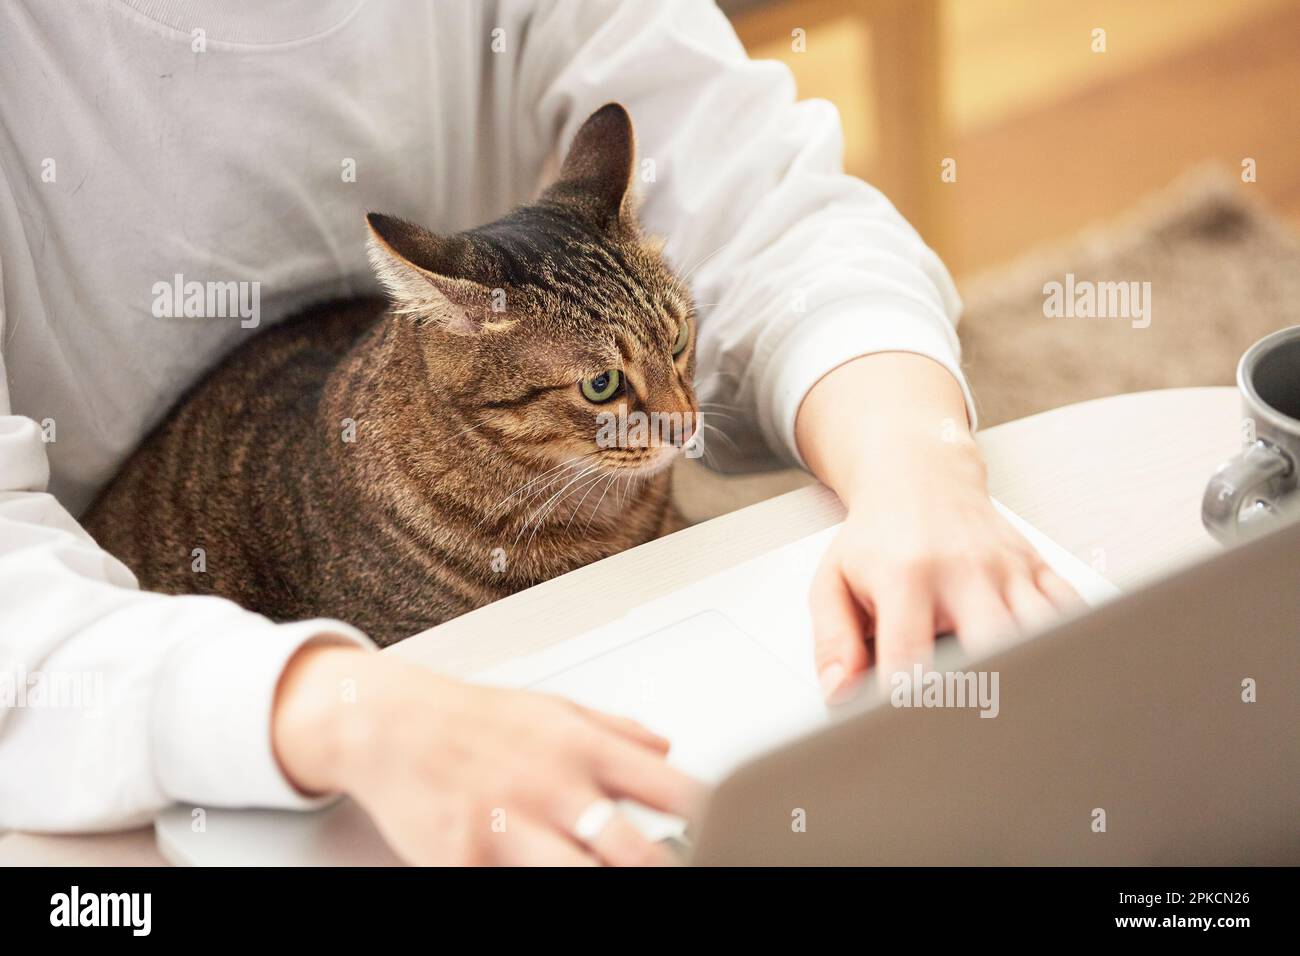 A cat and a person teleworking Stock Photo